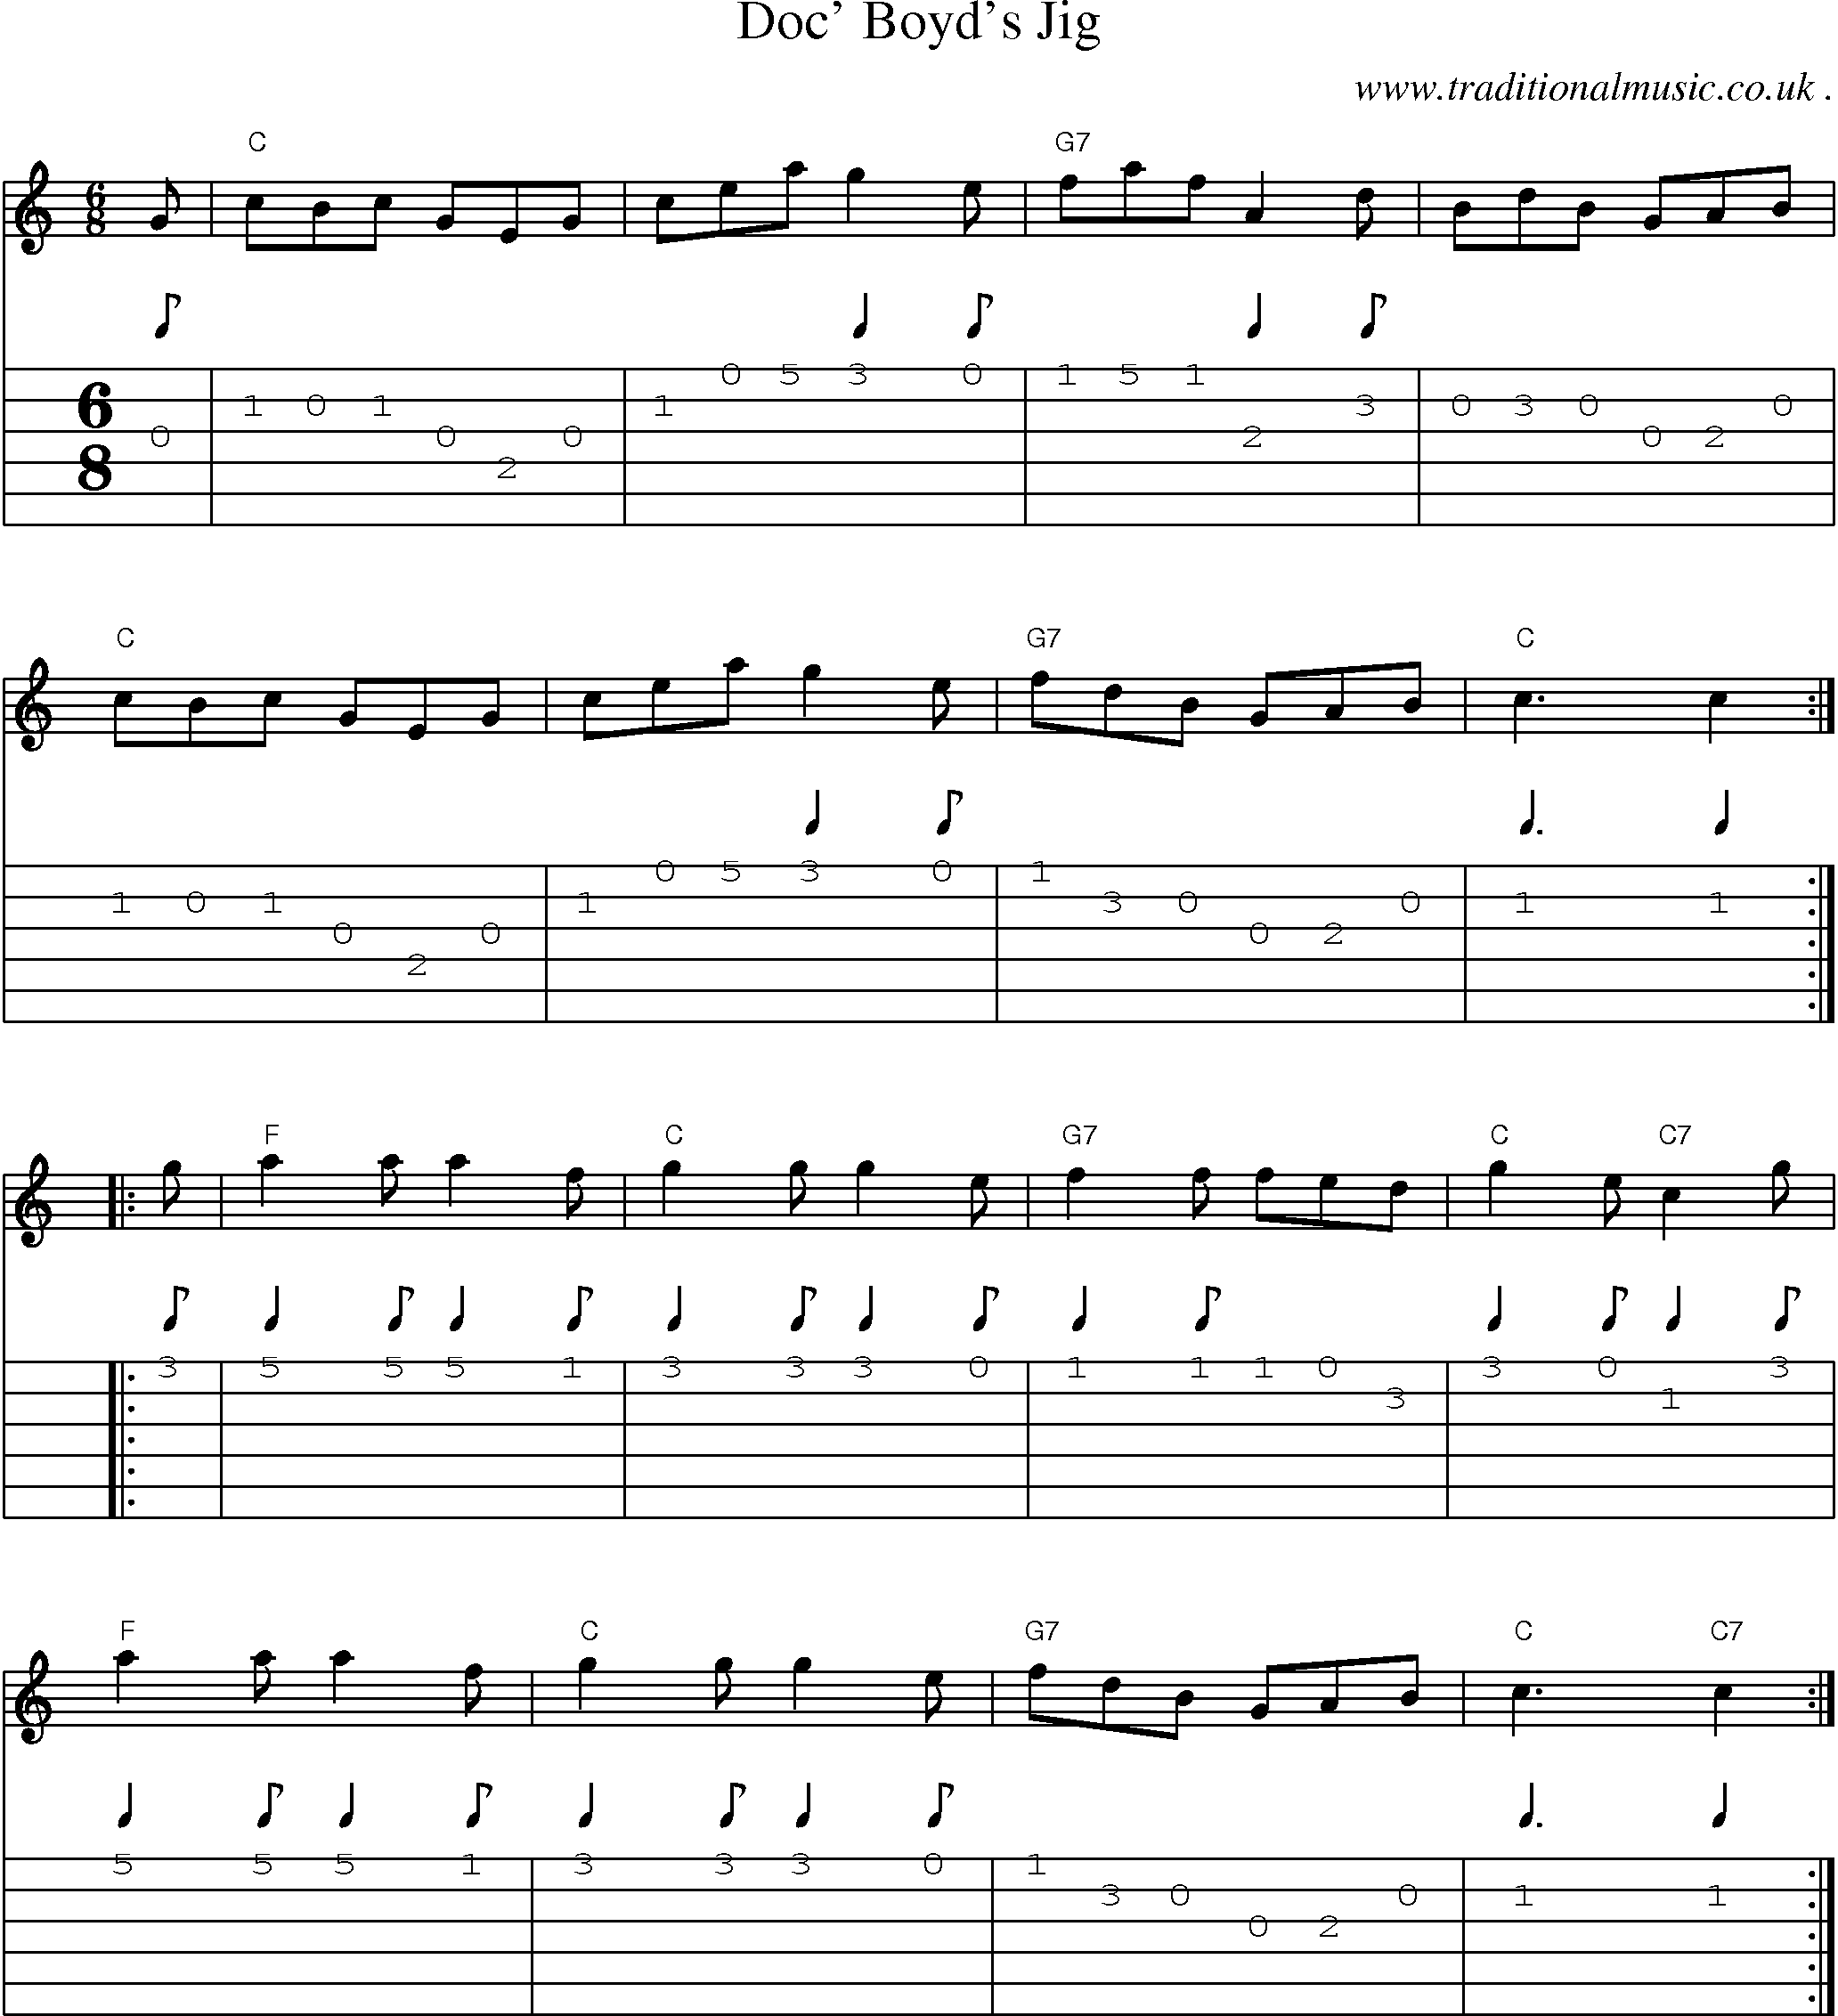 Sheet-Music and Guitar Tabs for Doc Boyds Jig